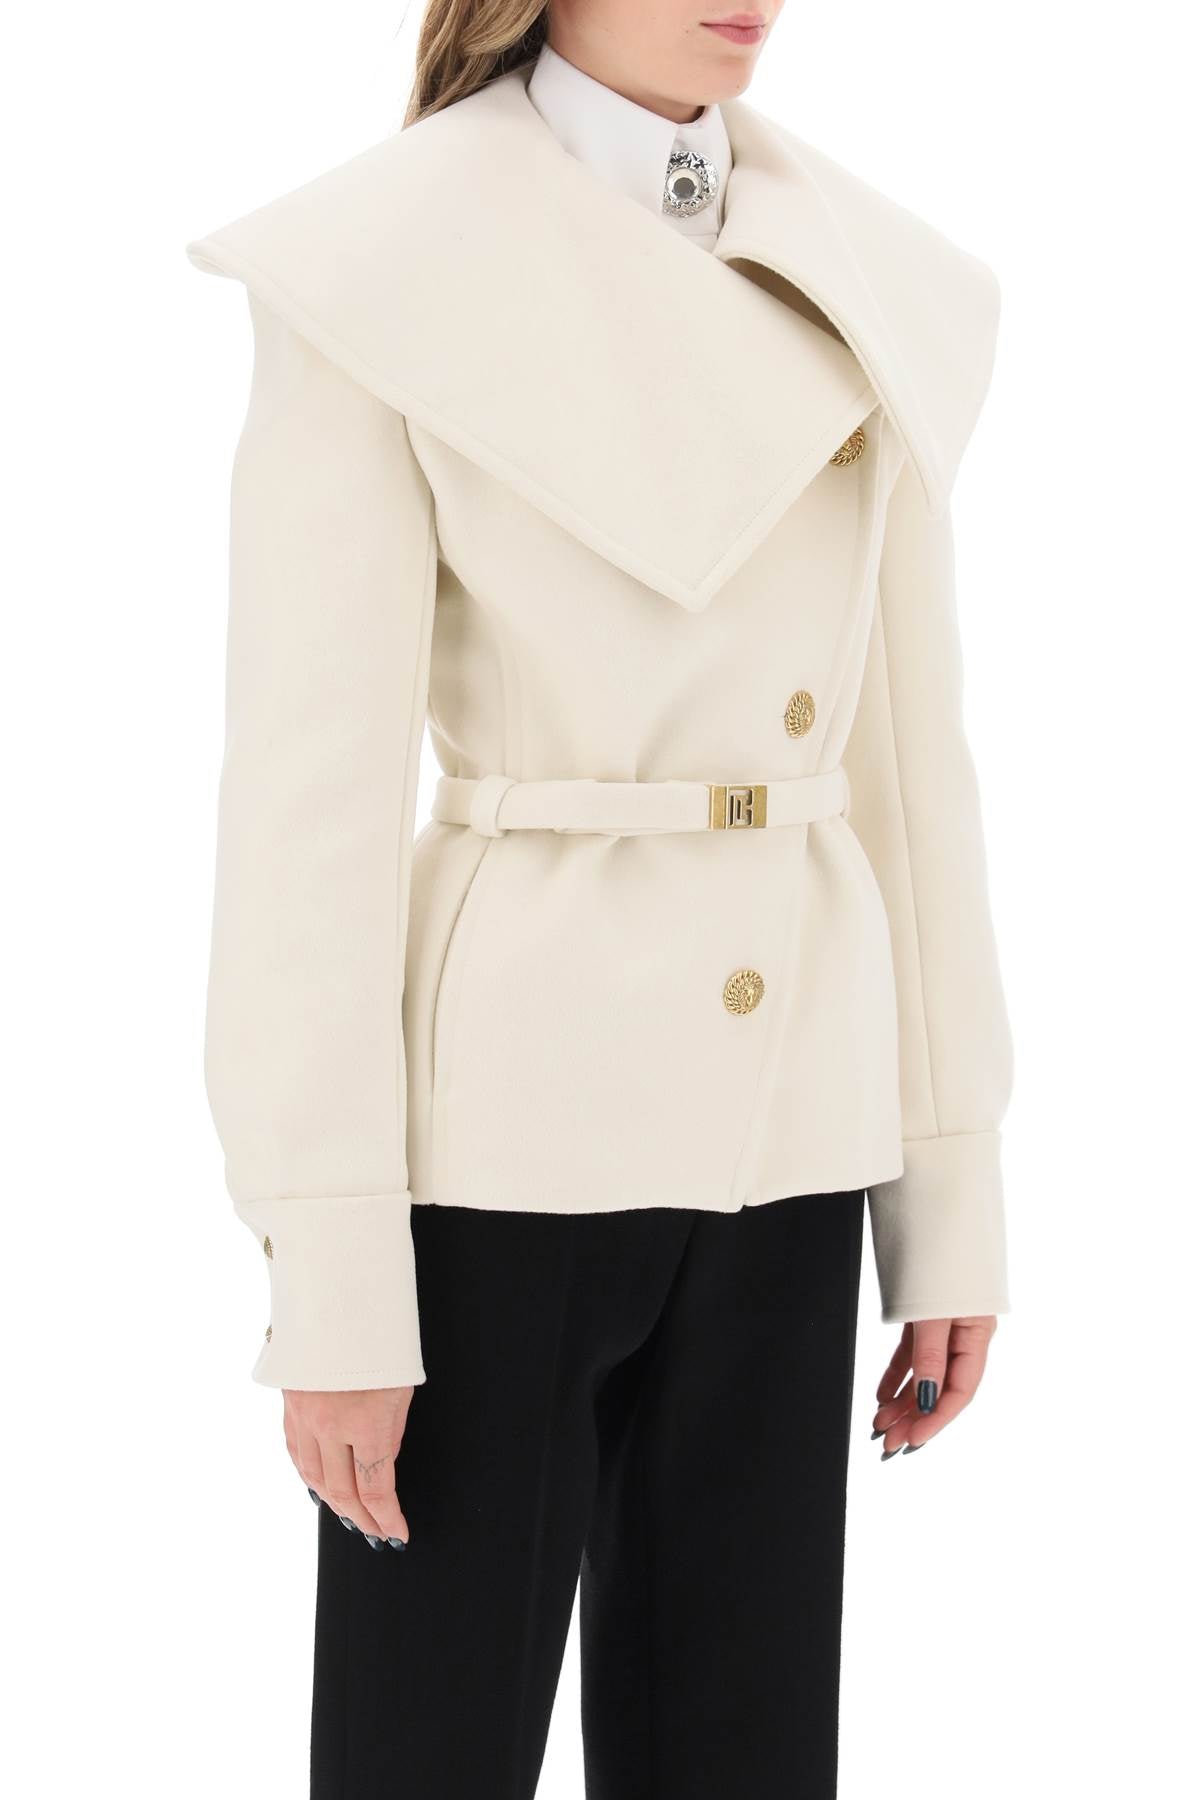 BALMAIN Fitted White Women's Peacoat with Oversized Collar and Monogram-Buckled Belt